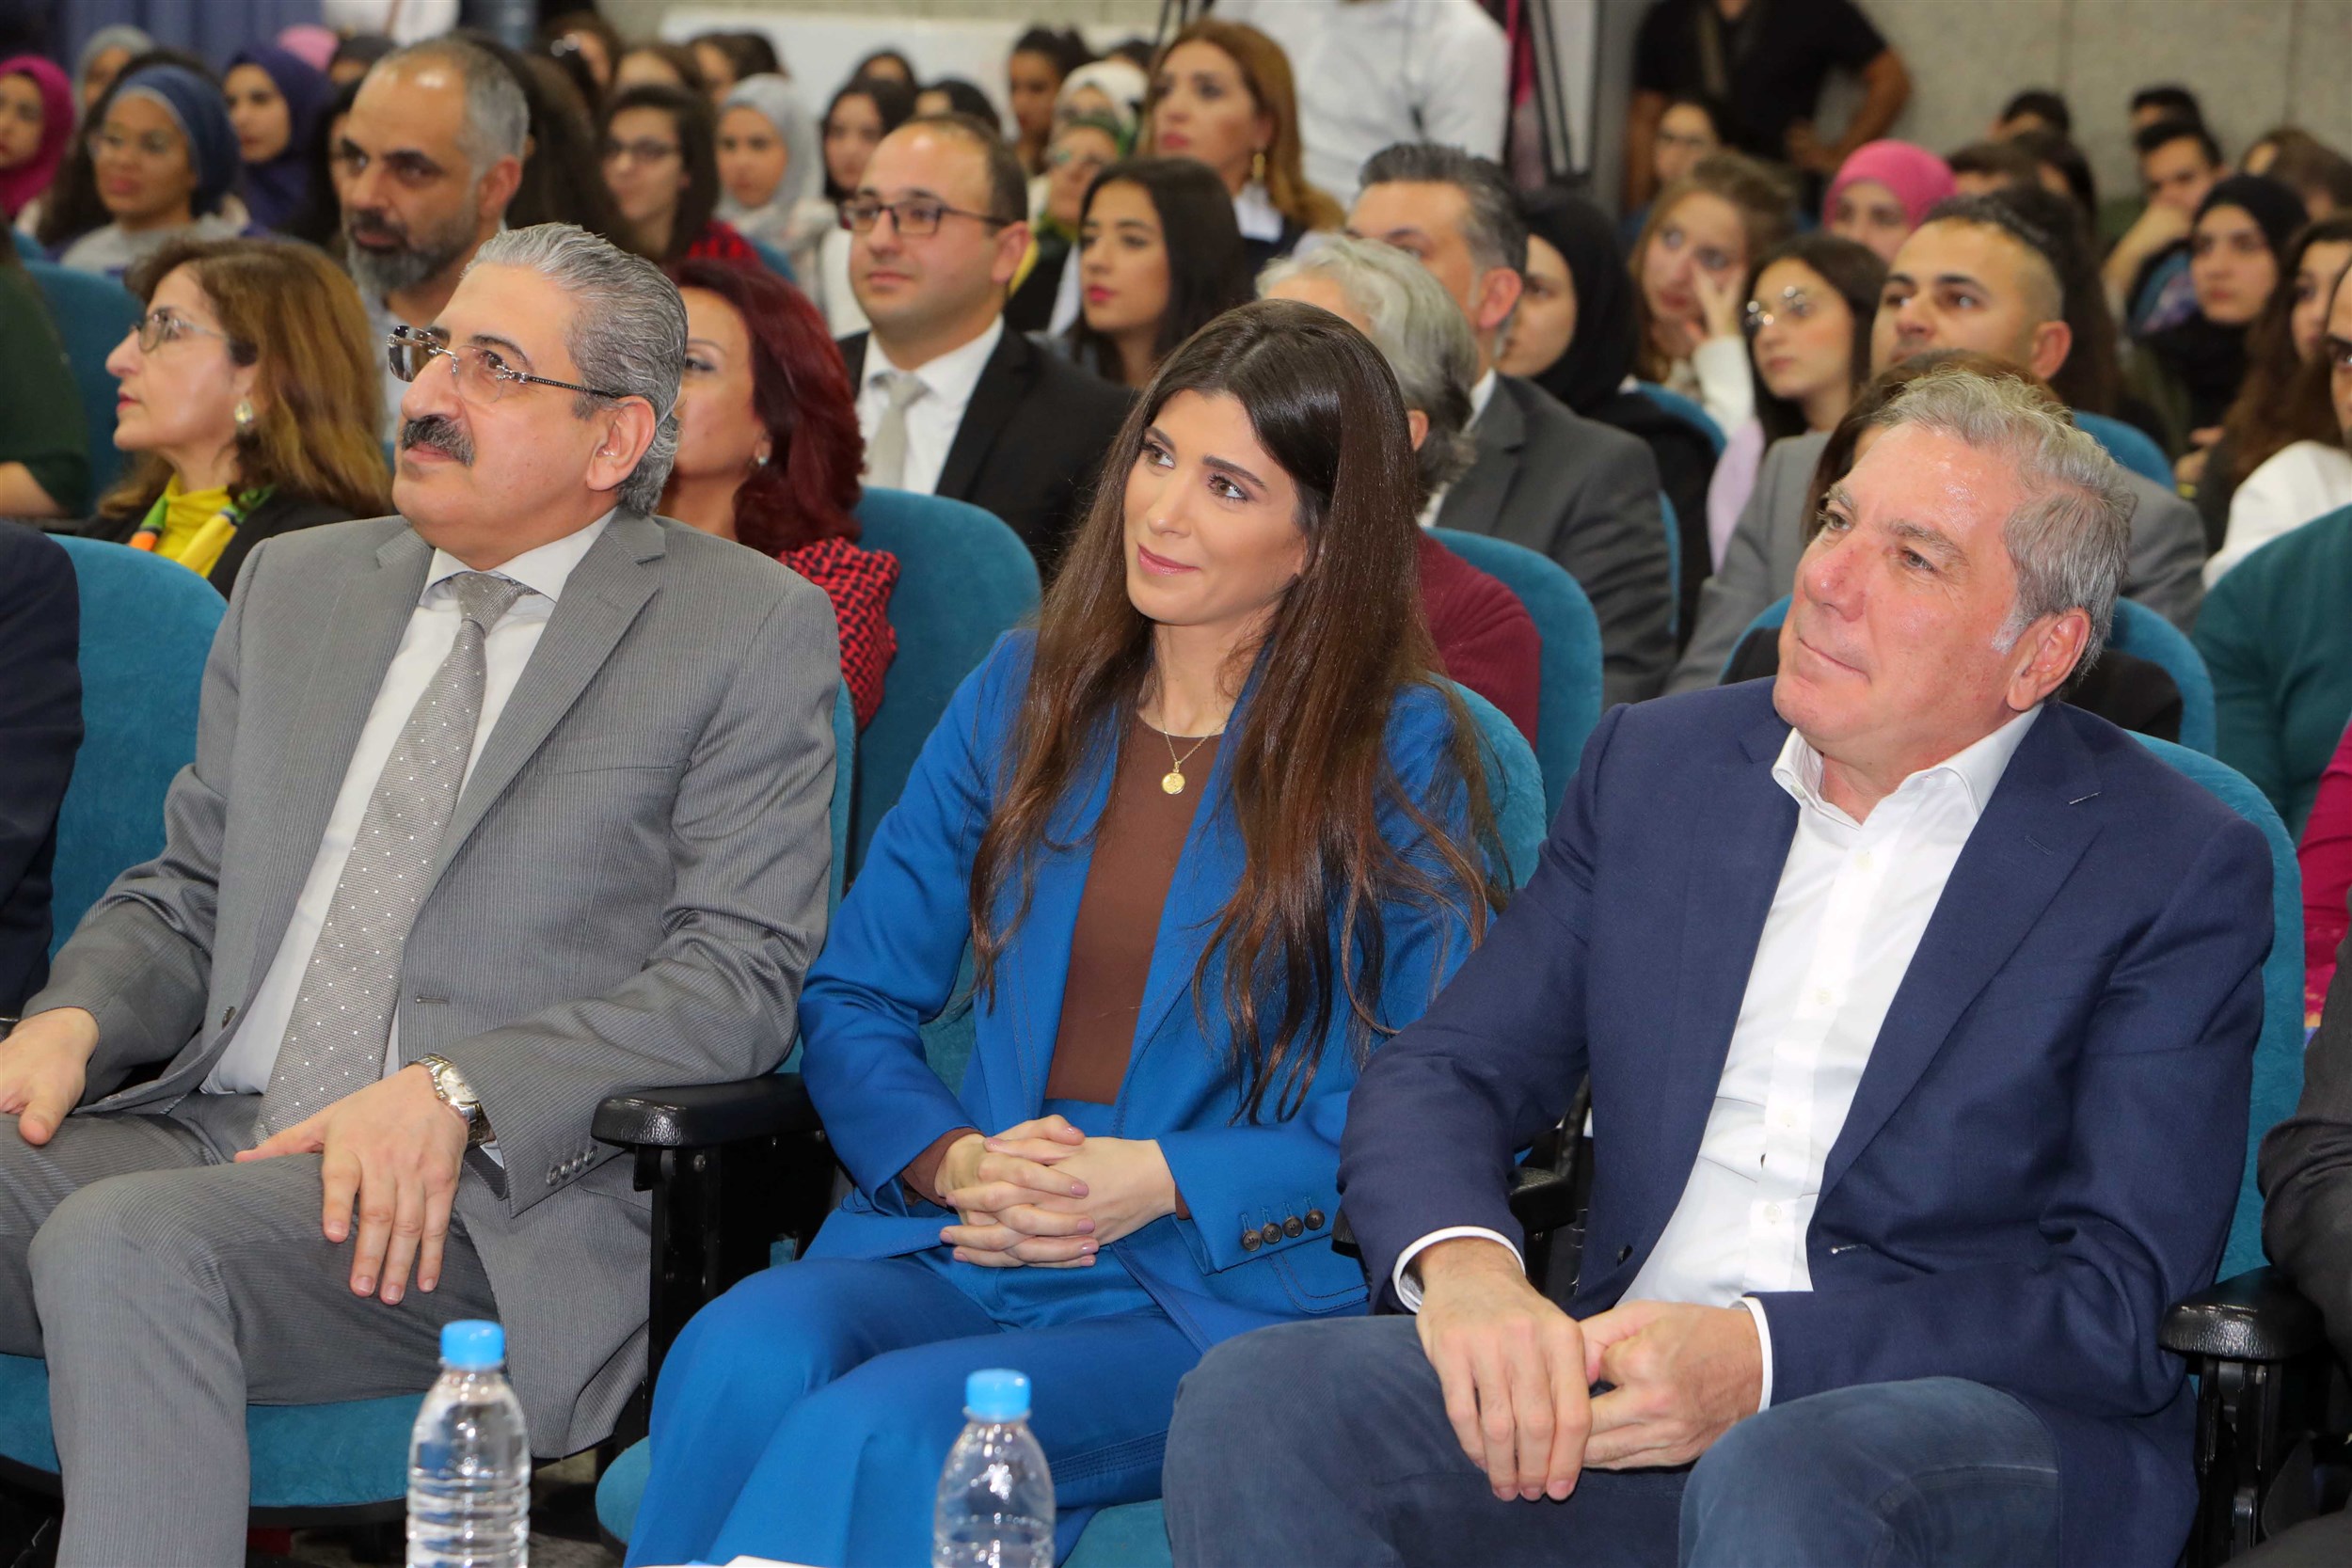 the president of the lebanese university professor fouad ayoub with mrs. inas al jarmakani and the director of mbc media group mr. ali jaber, as members of the jury at the ceremony held in the central administration center of the lebanese university.